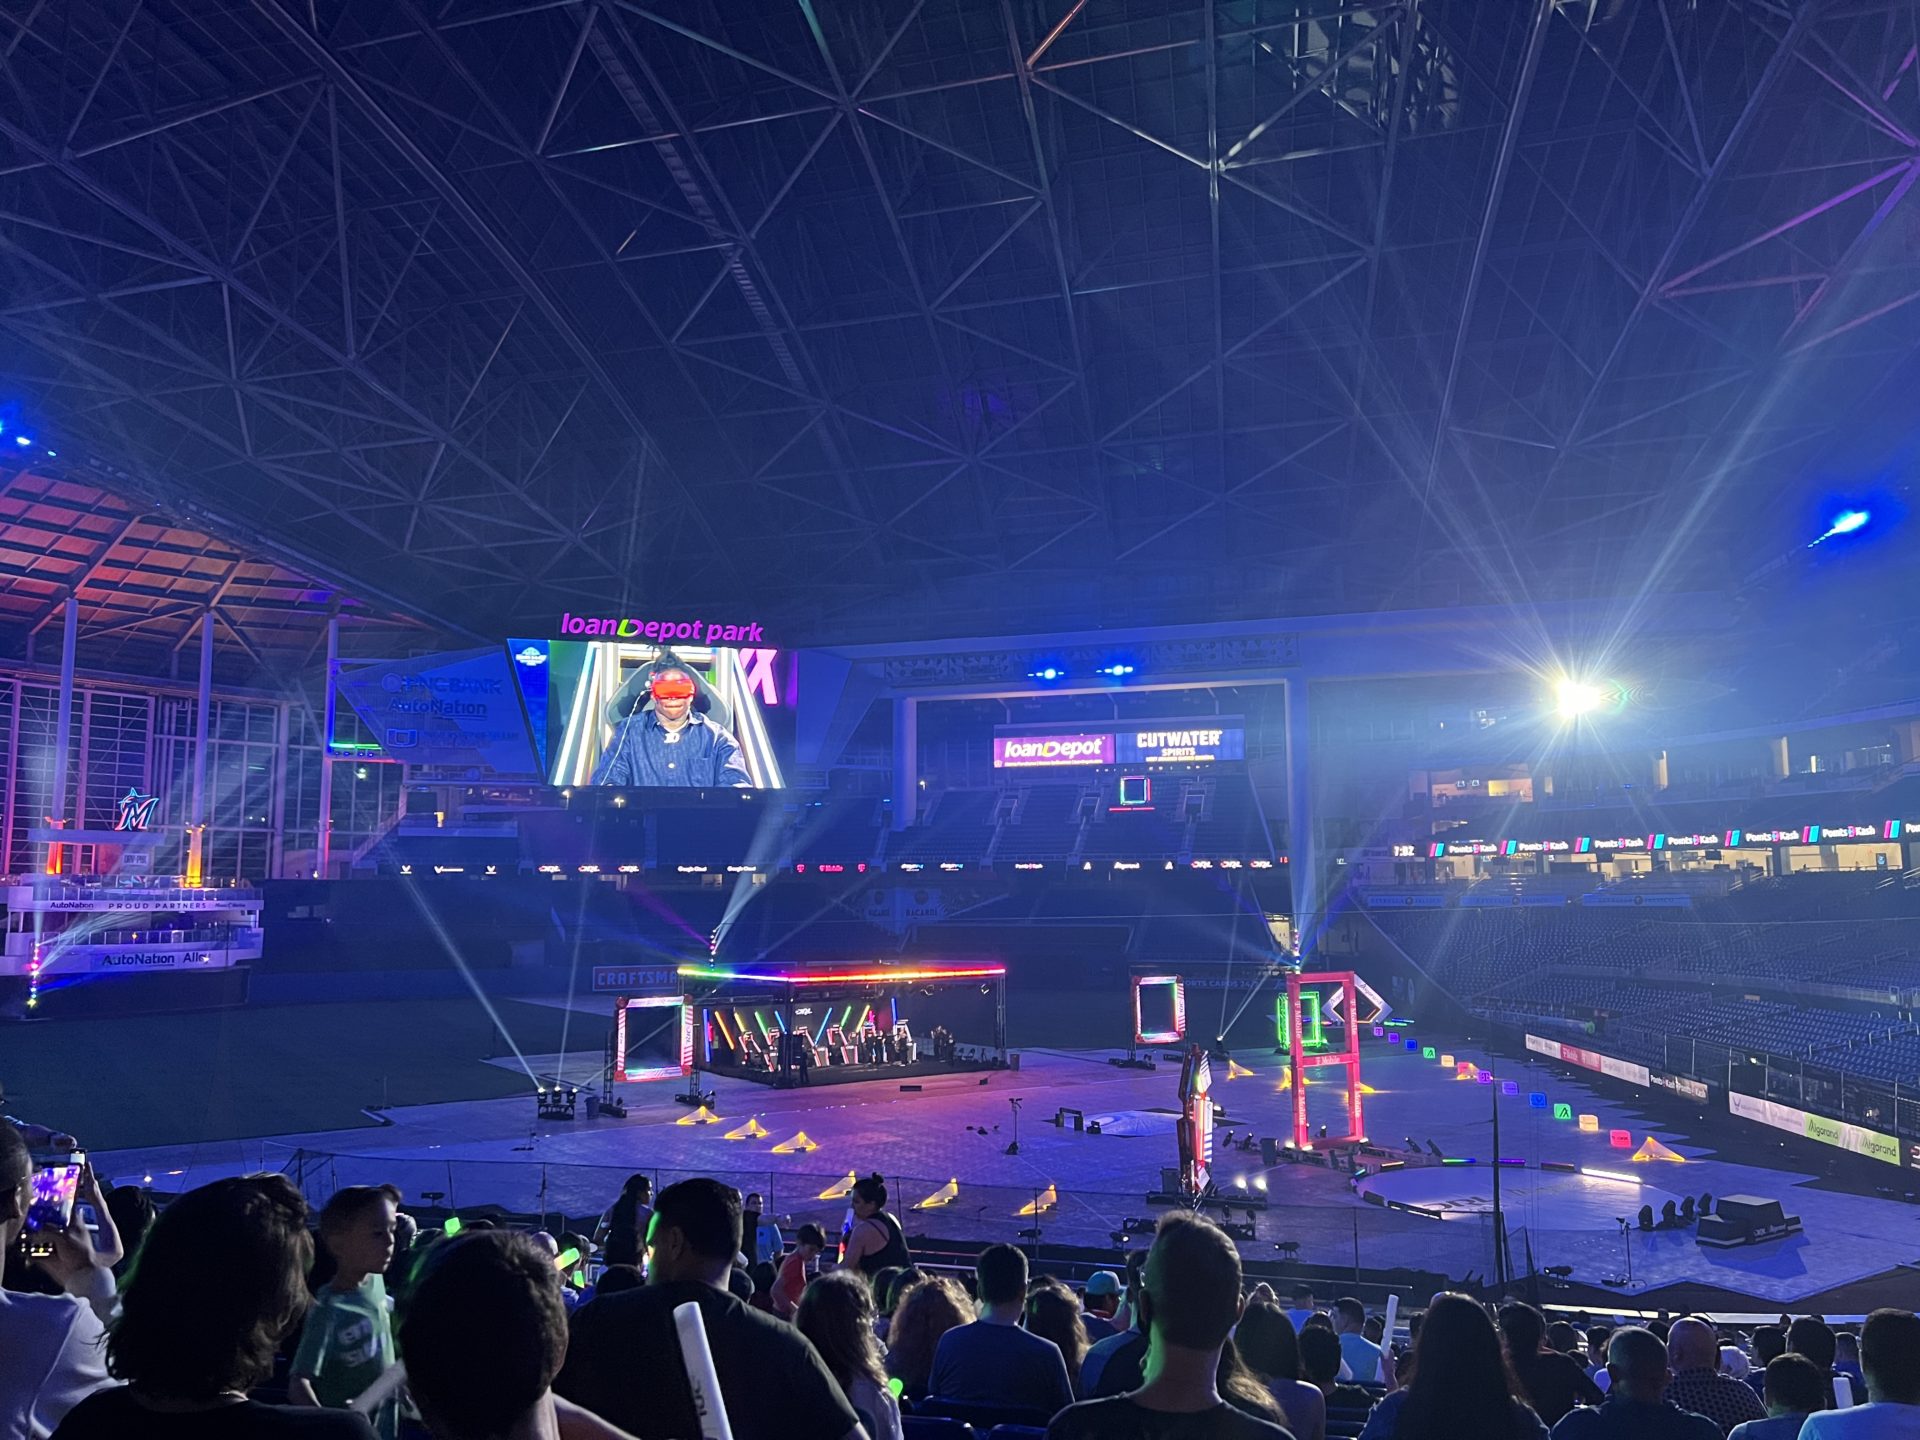 A Look Inside DJI's Drone Arena for Aerial Enthusiasts